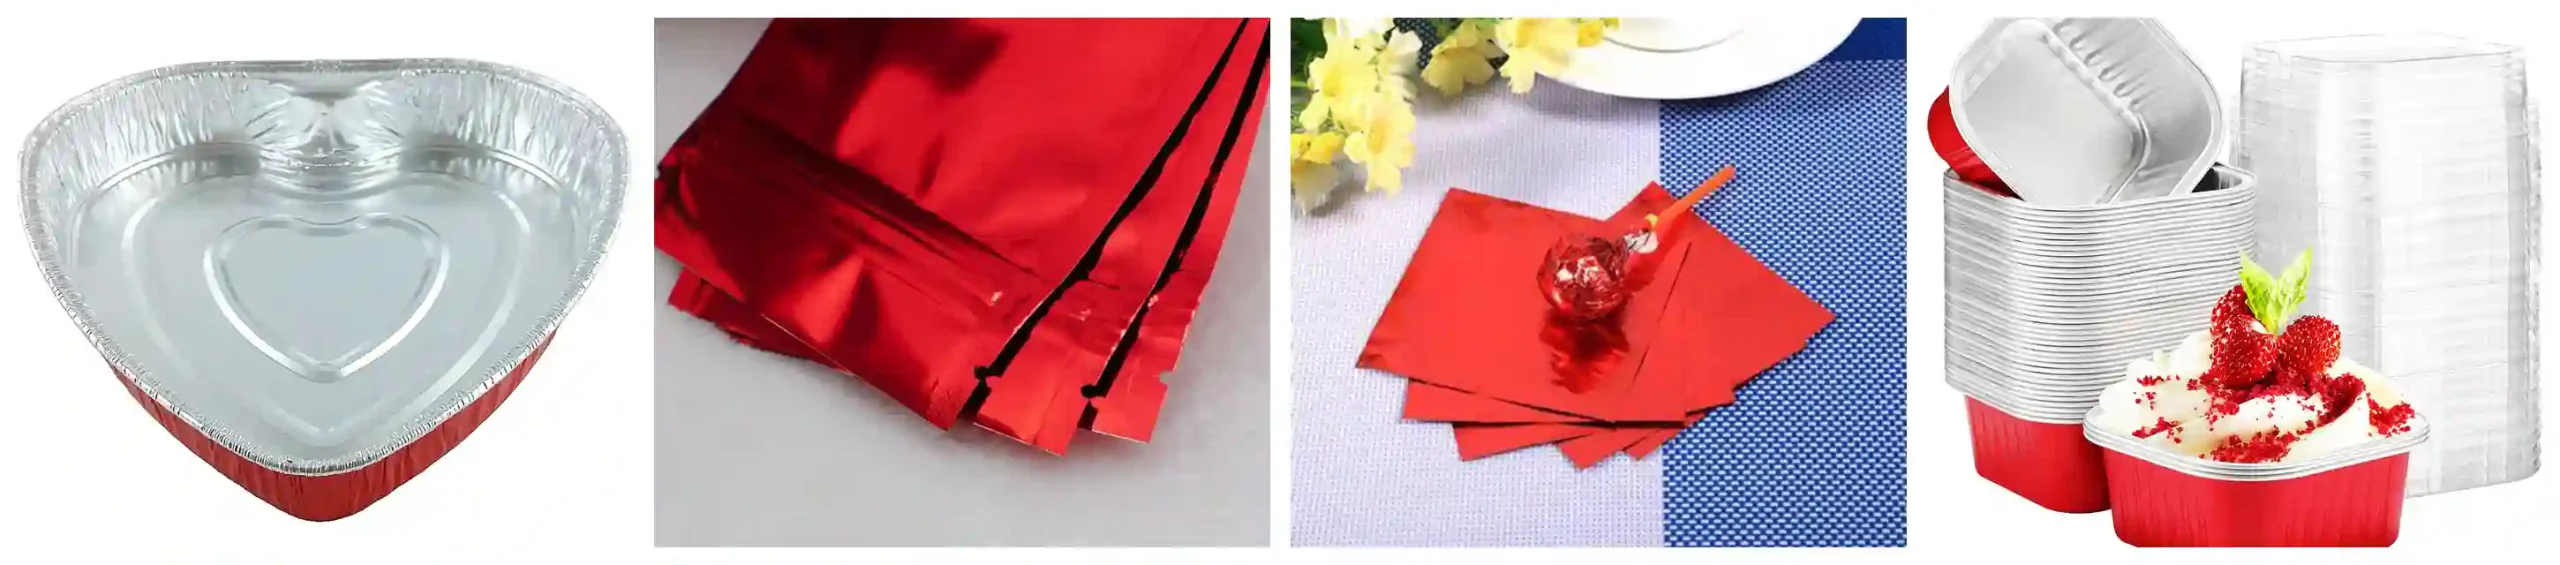 red aluminum foil for packaging, a wrapper for chocolate candies and cigarette packaging